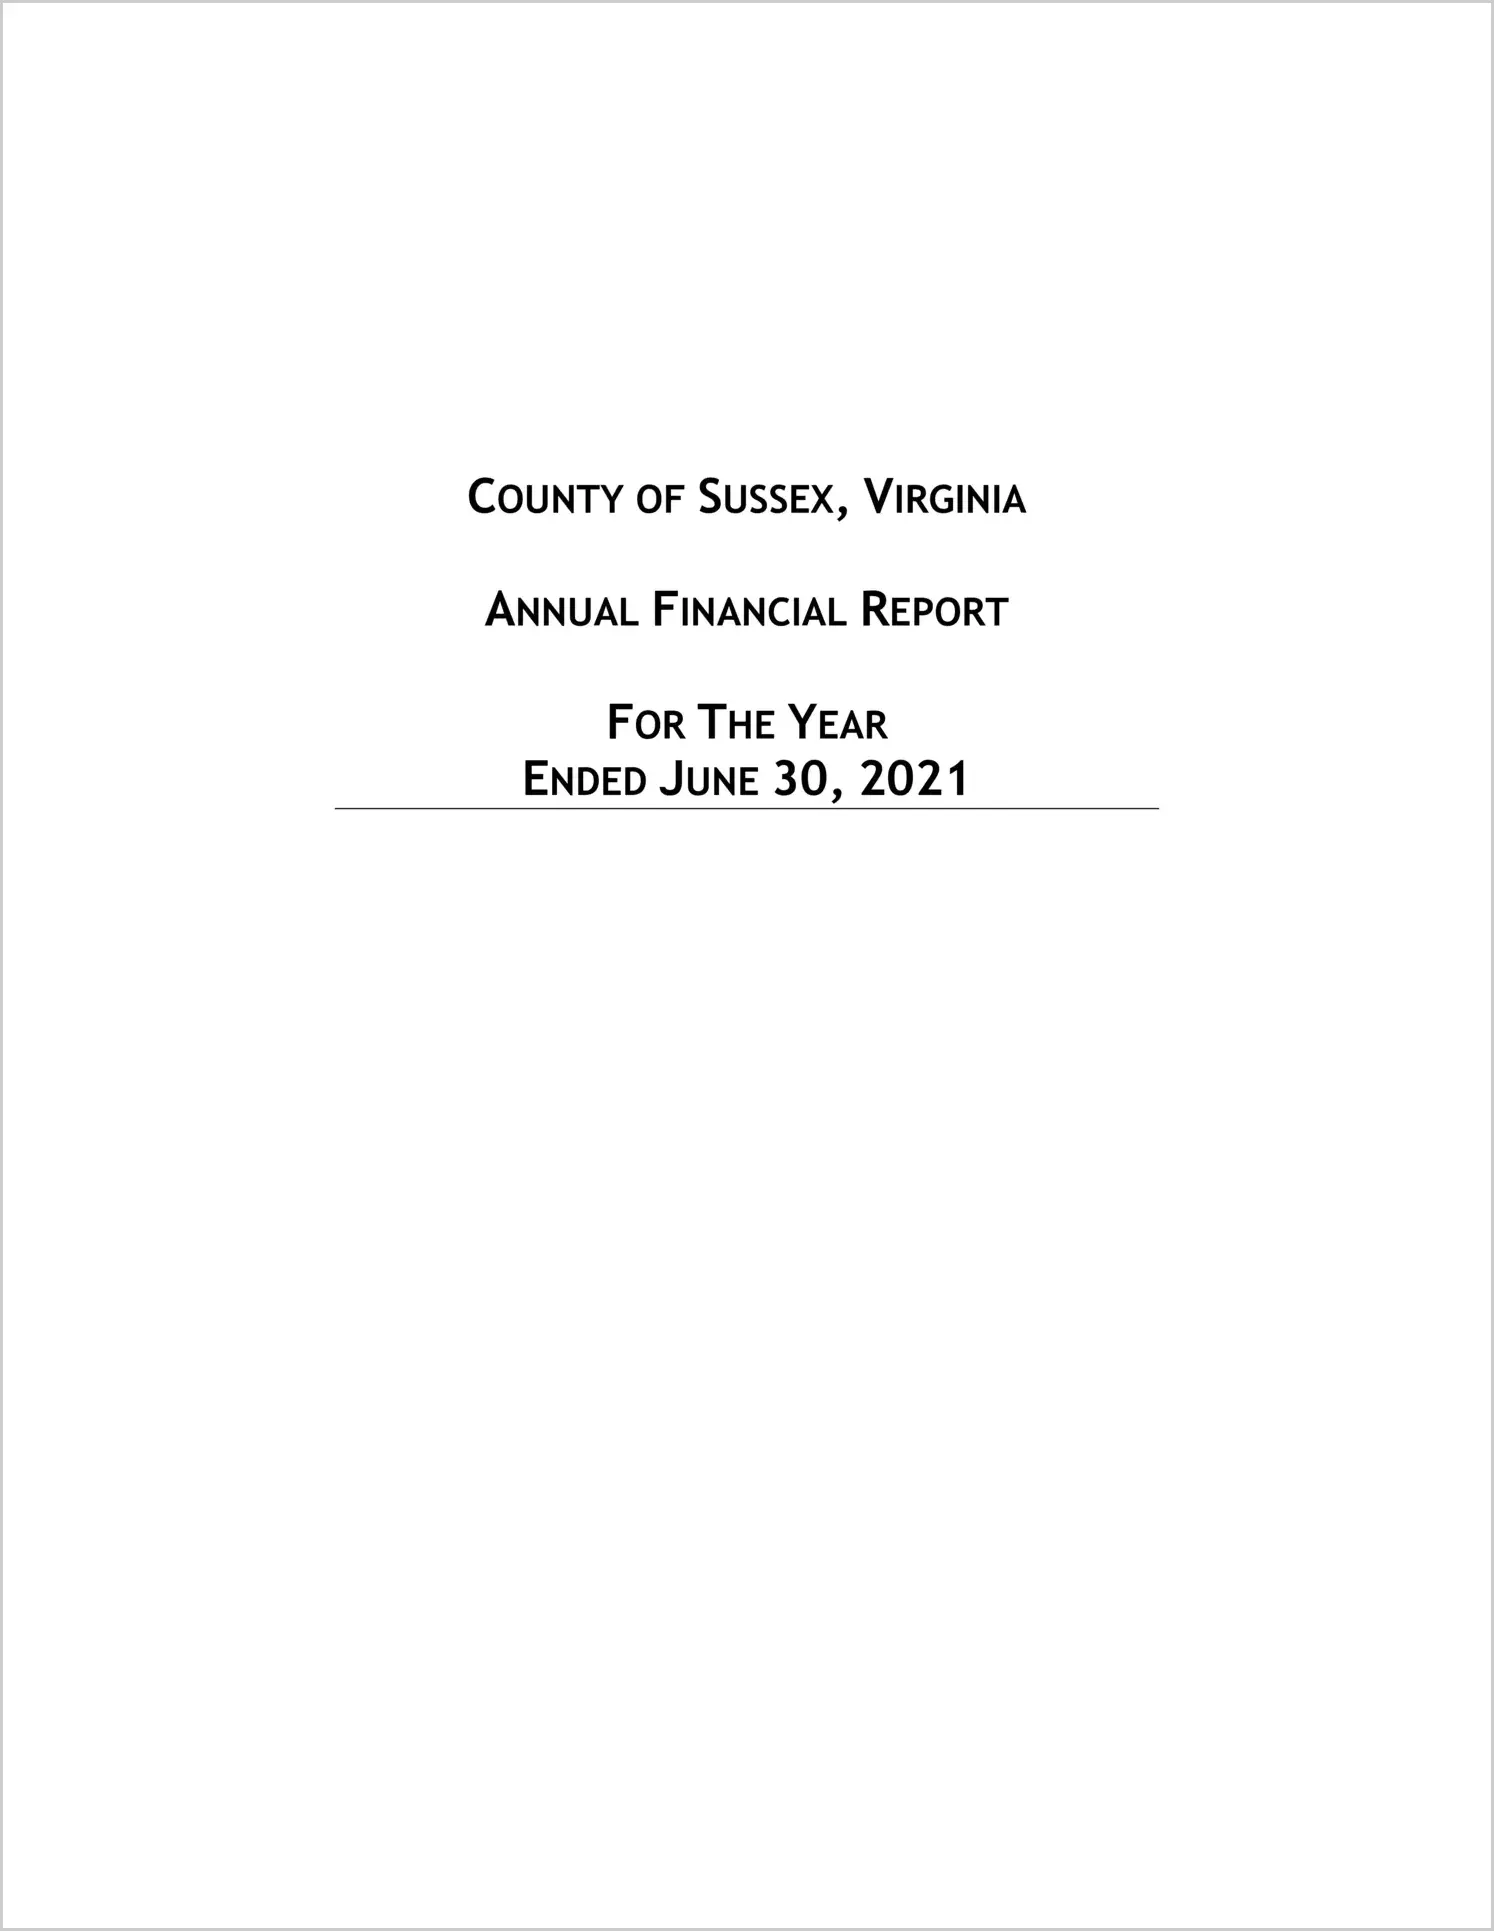 2021 Annual Financial Report for County of Sussex